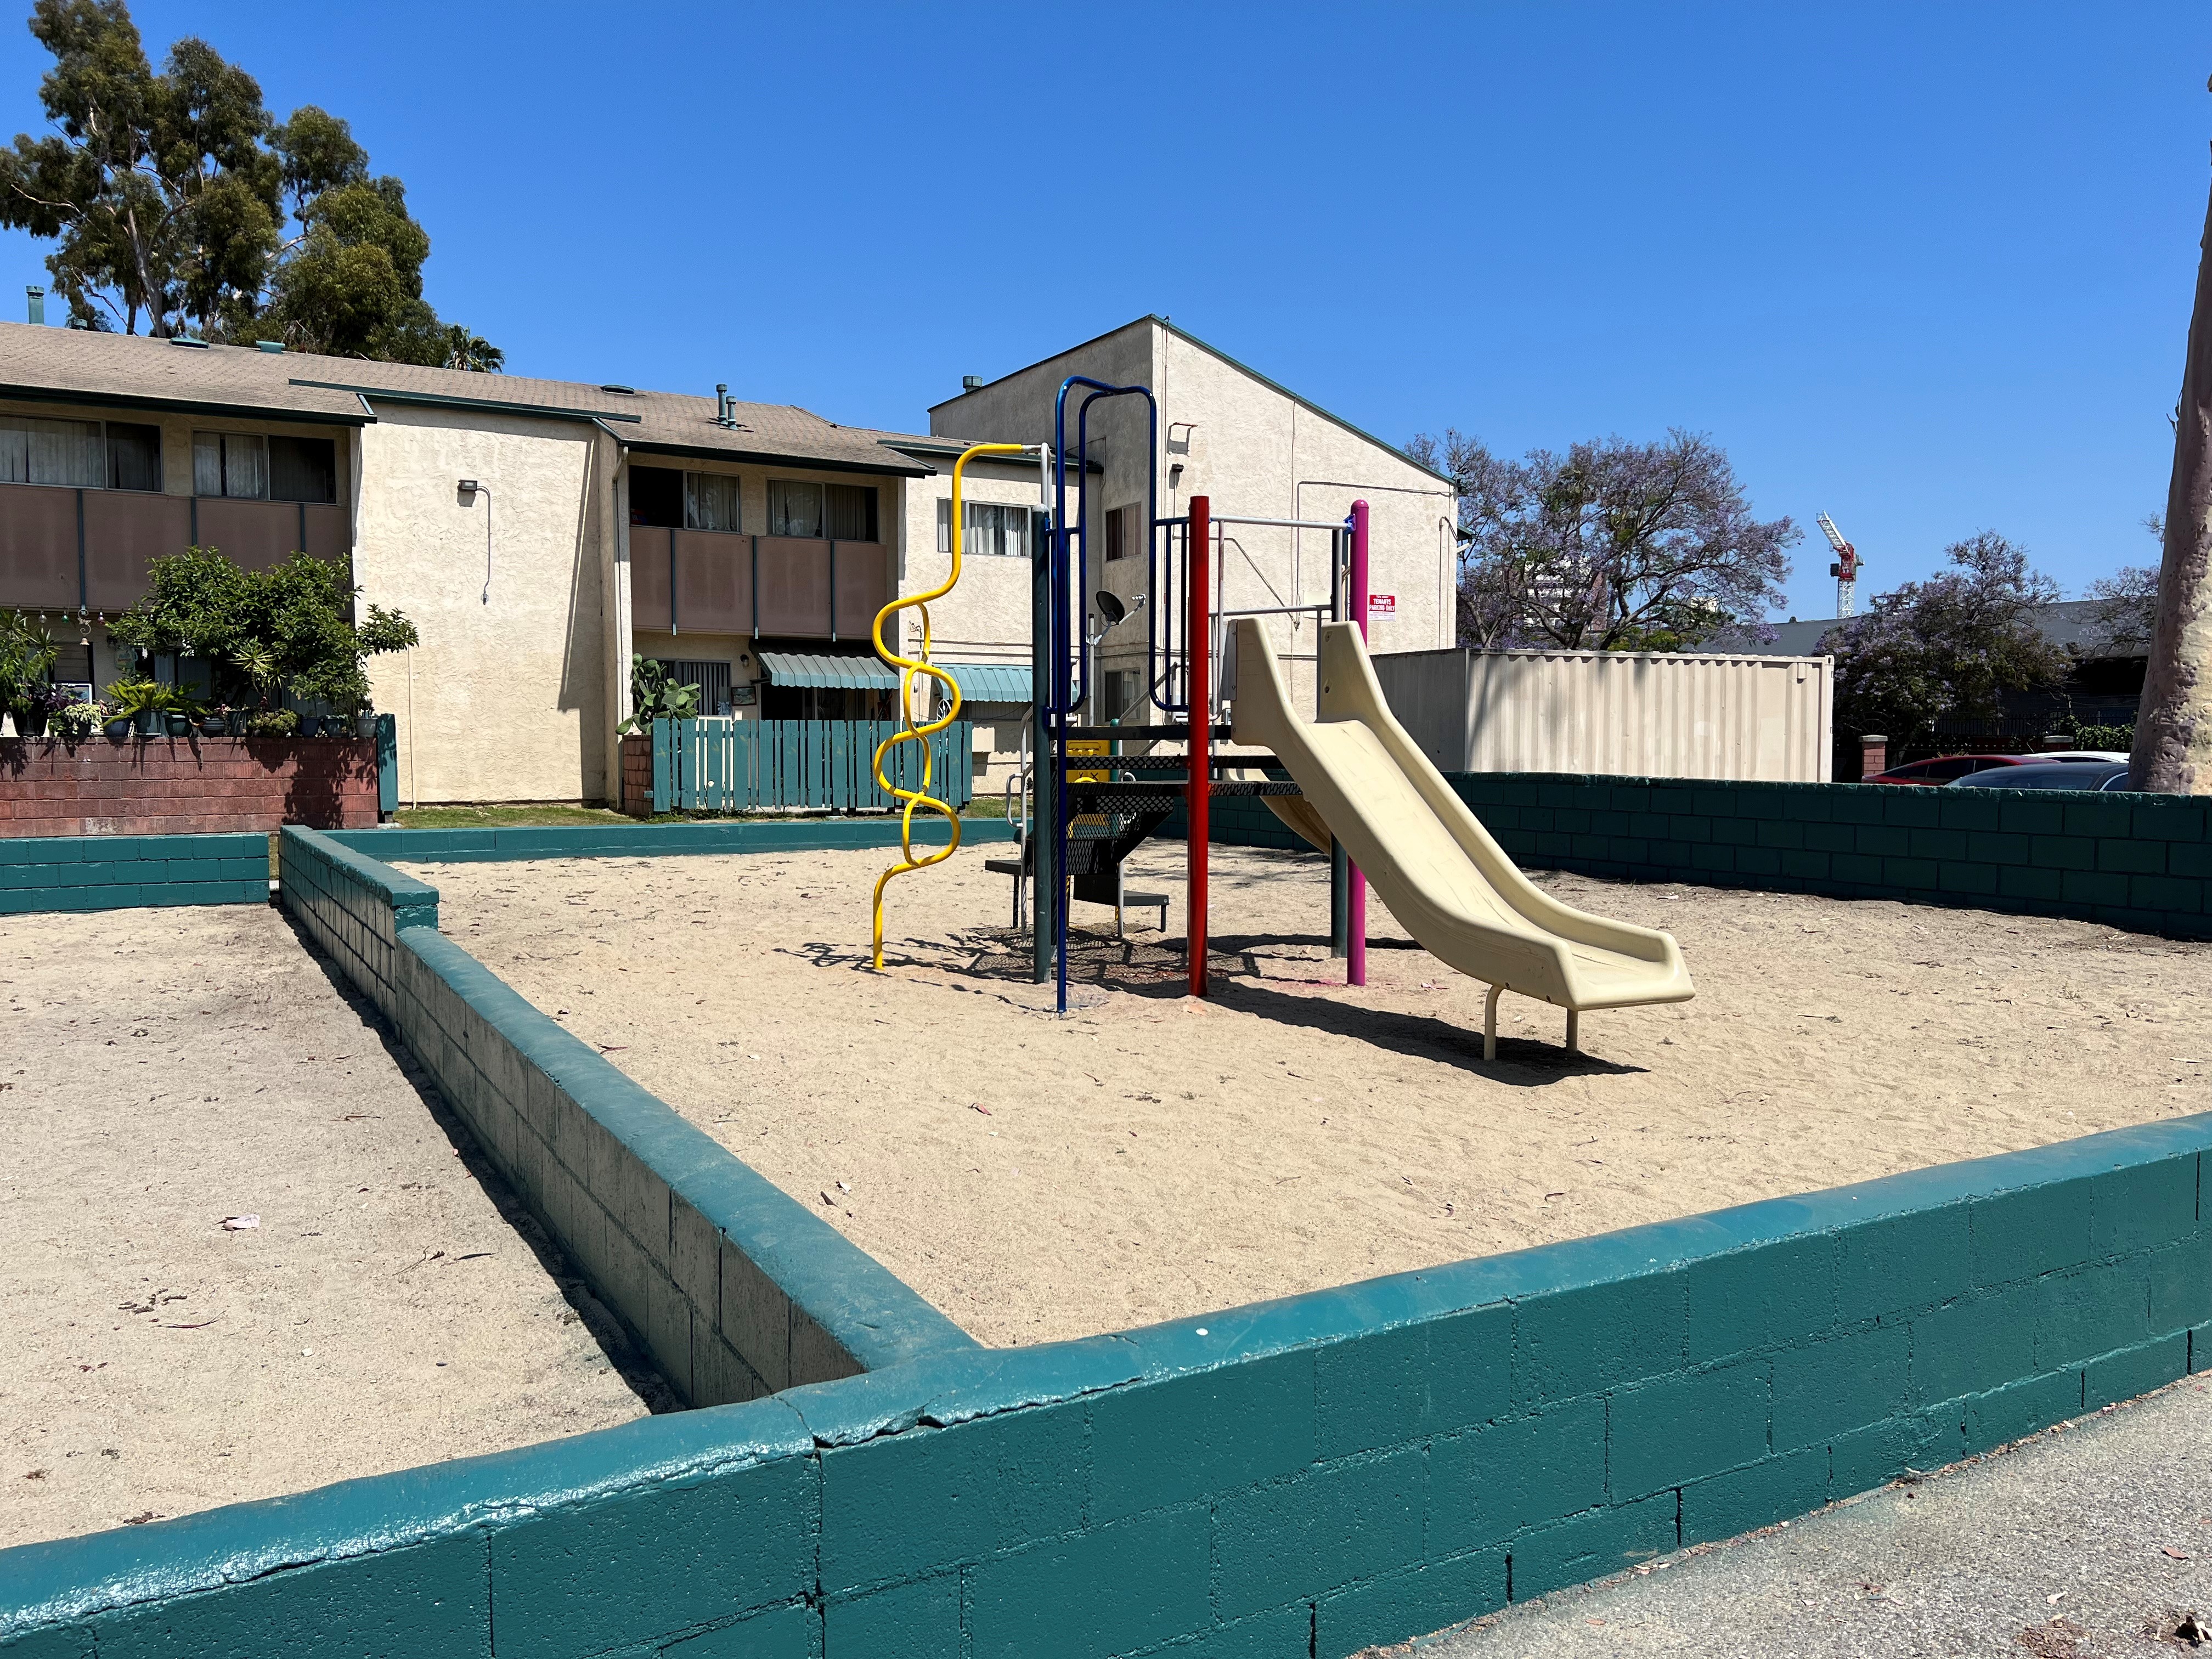 Photo of front of property and playground